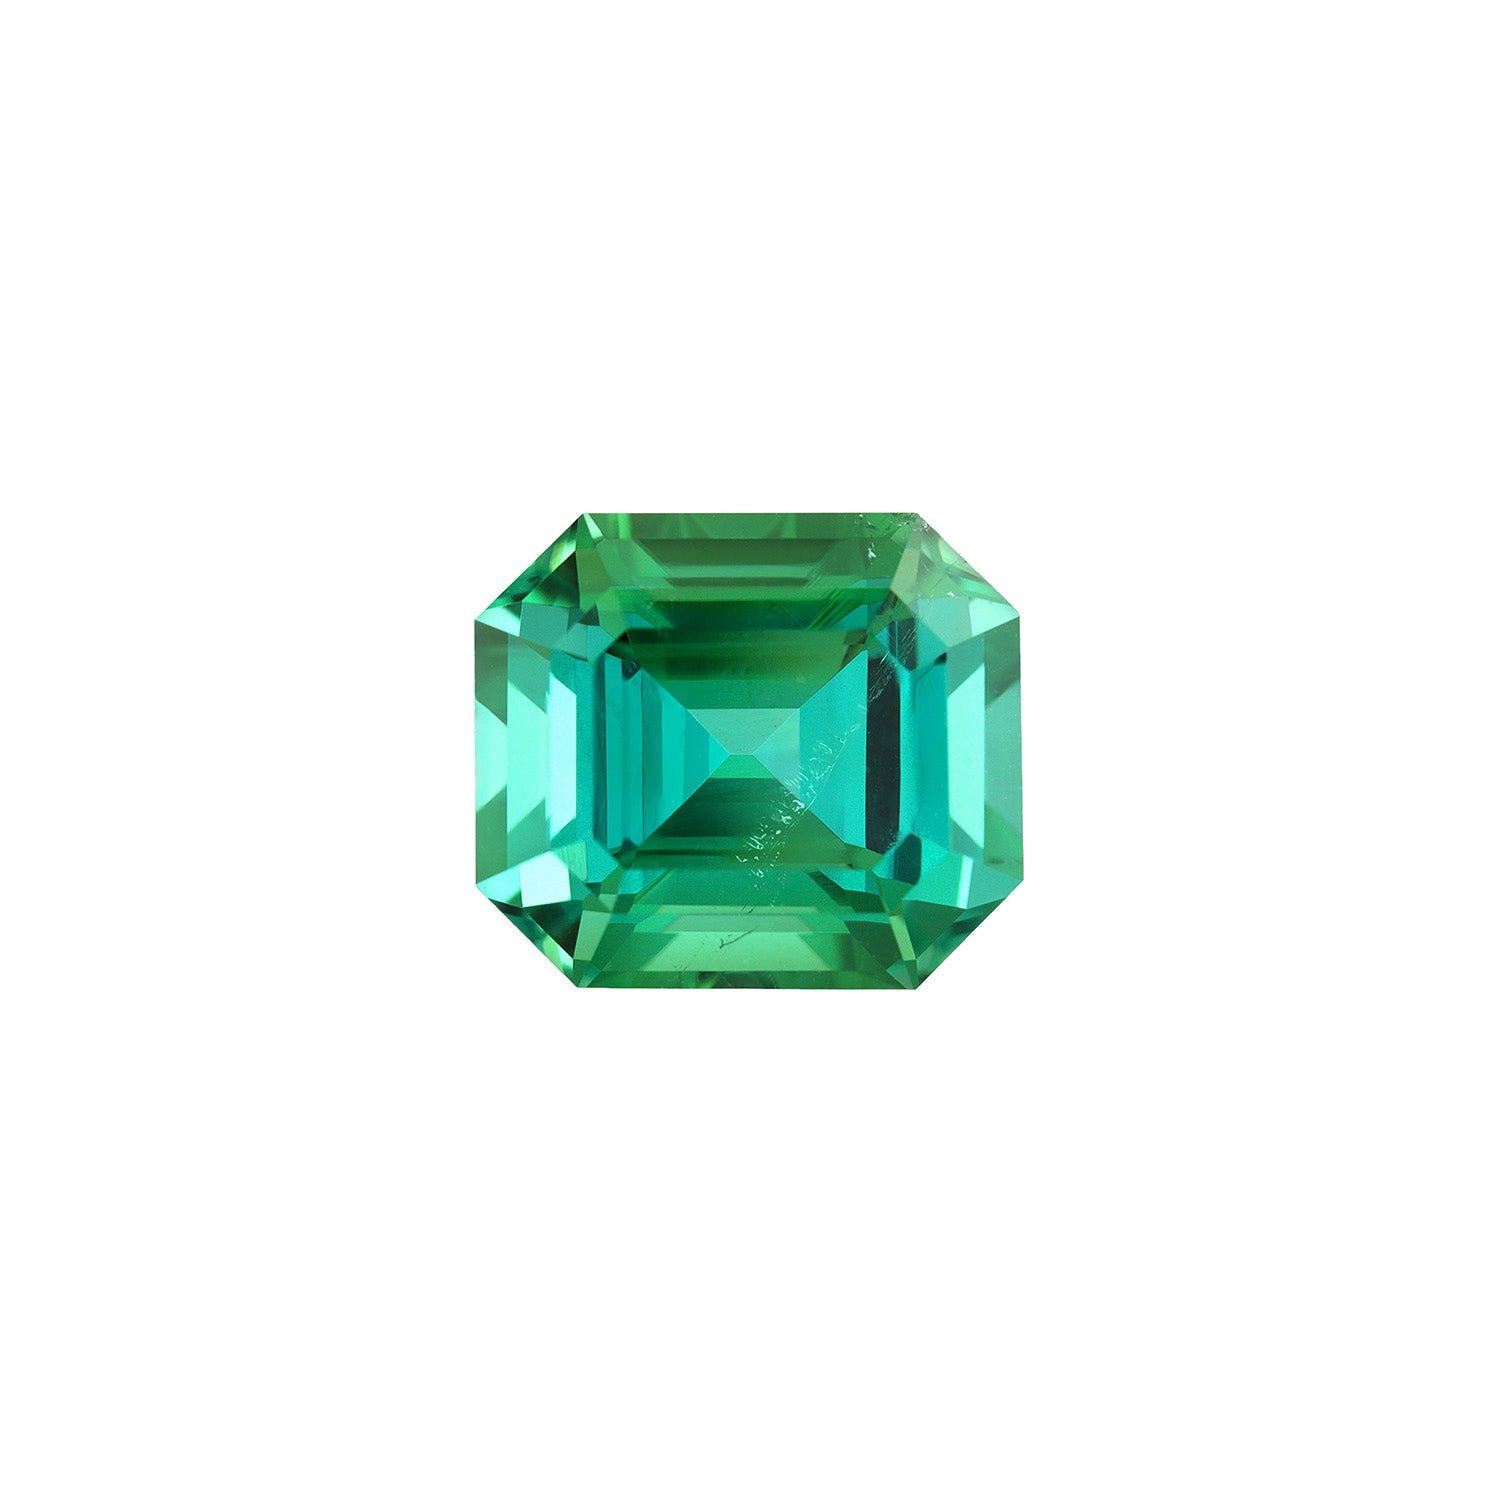 4.38 carat Afghani blue-green tourmaline, emerald cut, known for its deep and vivid coloration. Ideal for a custom-designed, luxurious cocktail ring.